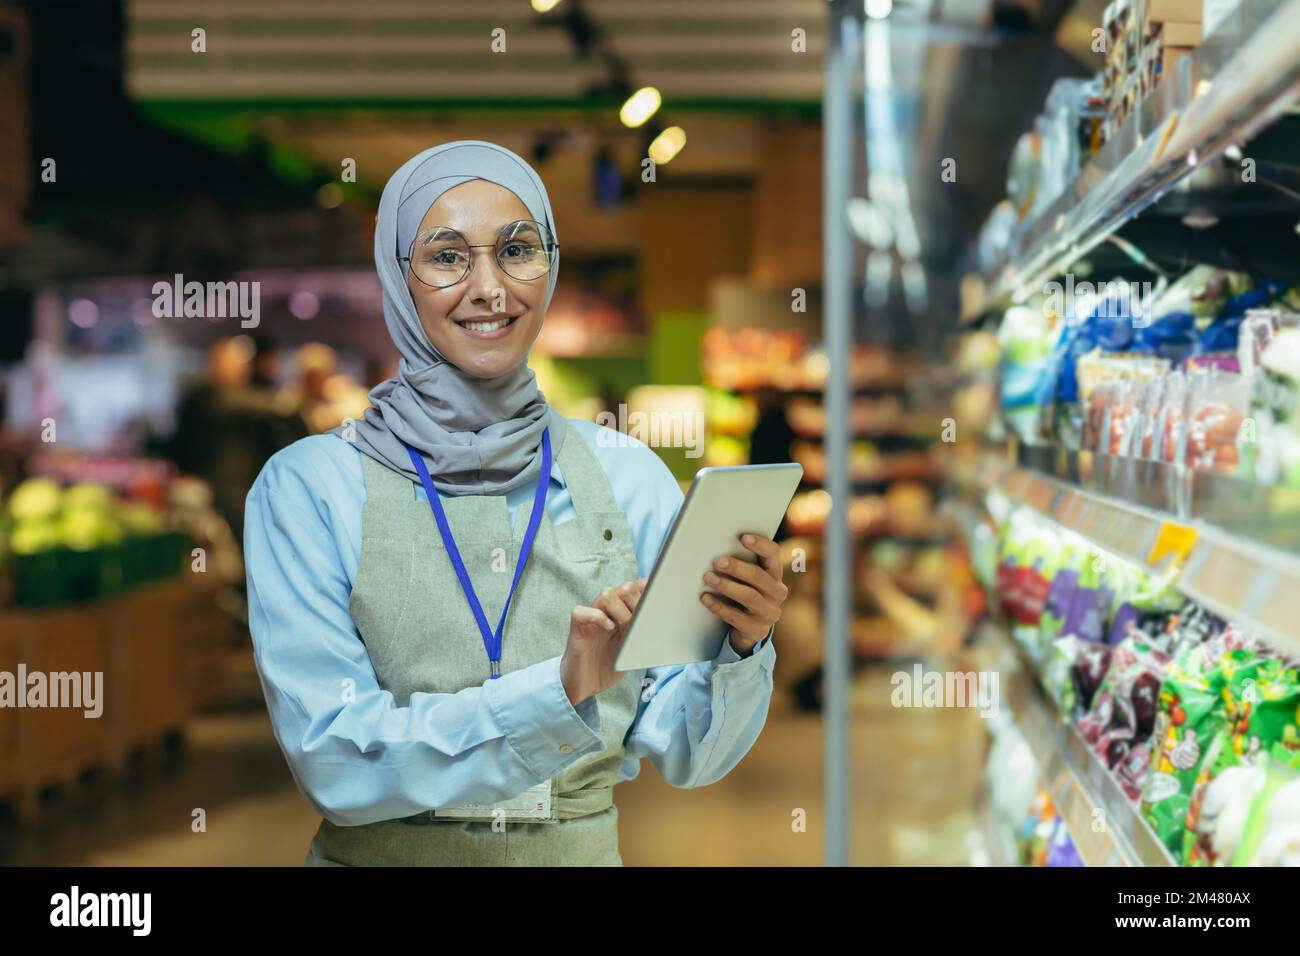 Portrait of happy and smiling seller woman in hijab, muslim woman with tablet smiling and looking at camera, saleswoman near field with vegetables and salad products chooses and sifts term. Stock Photo